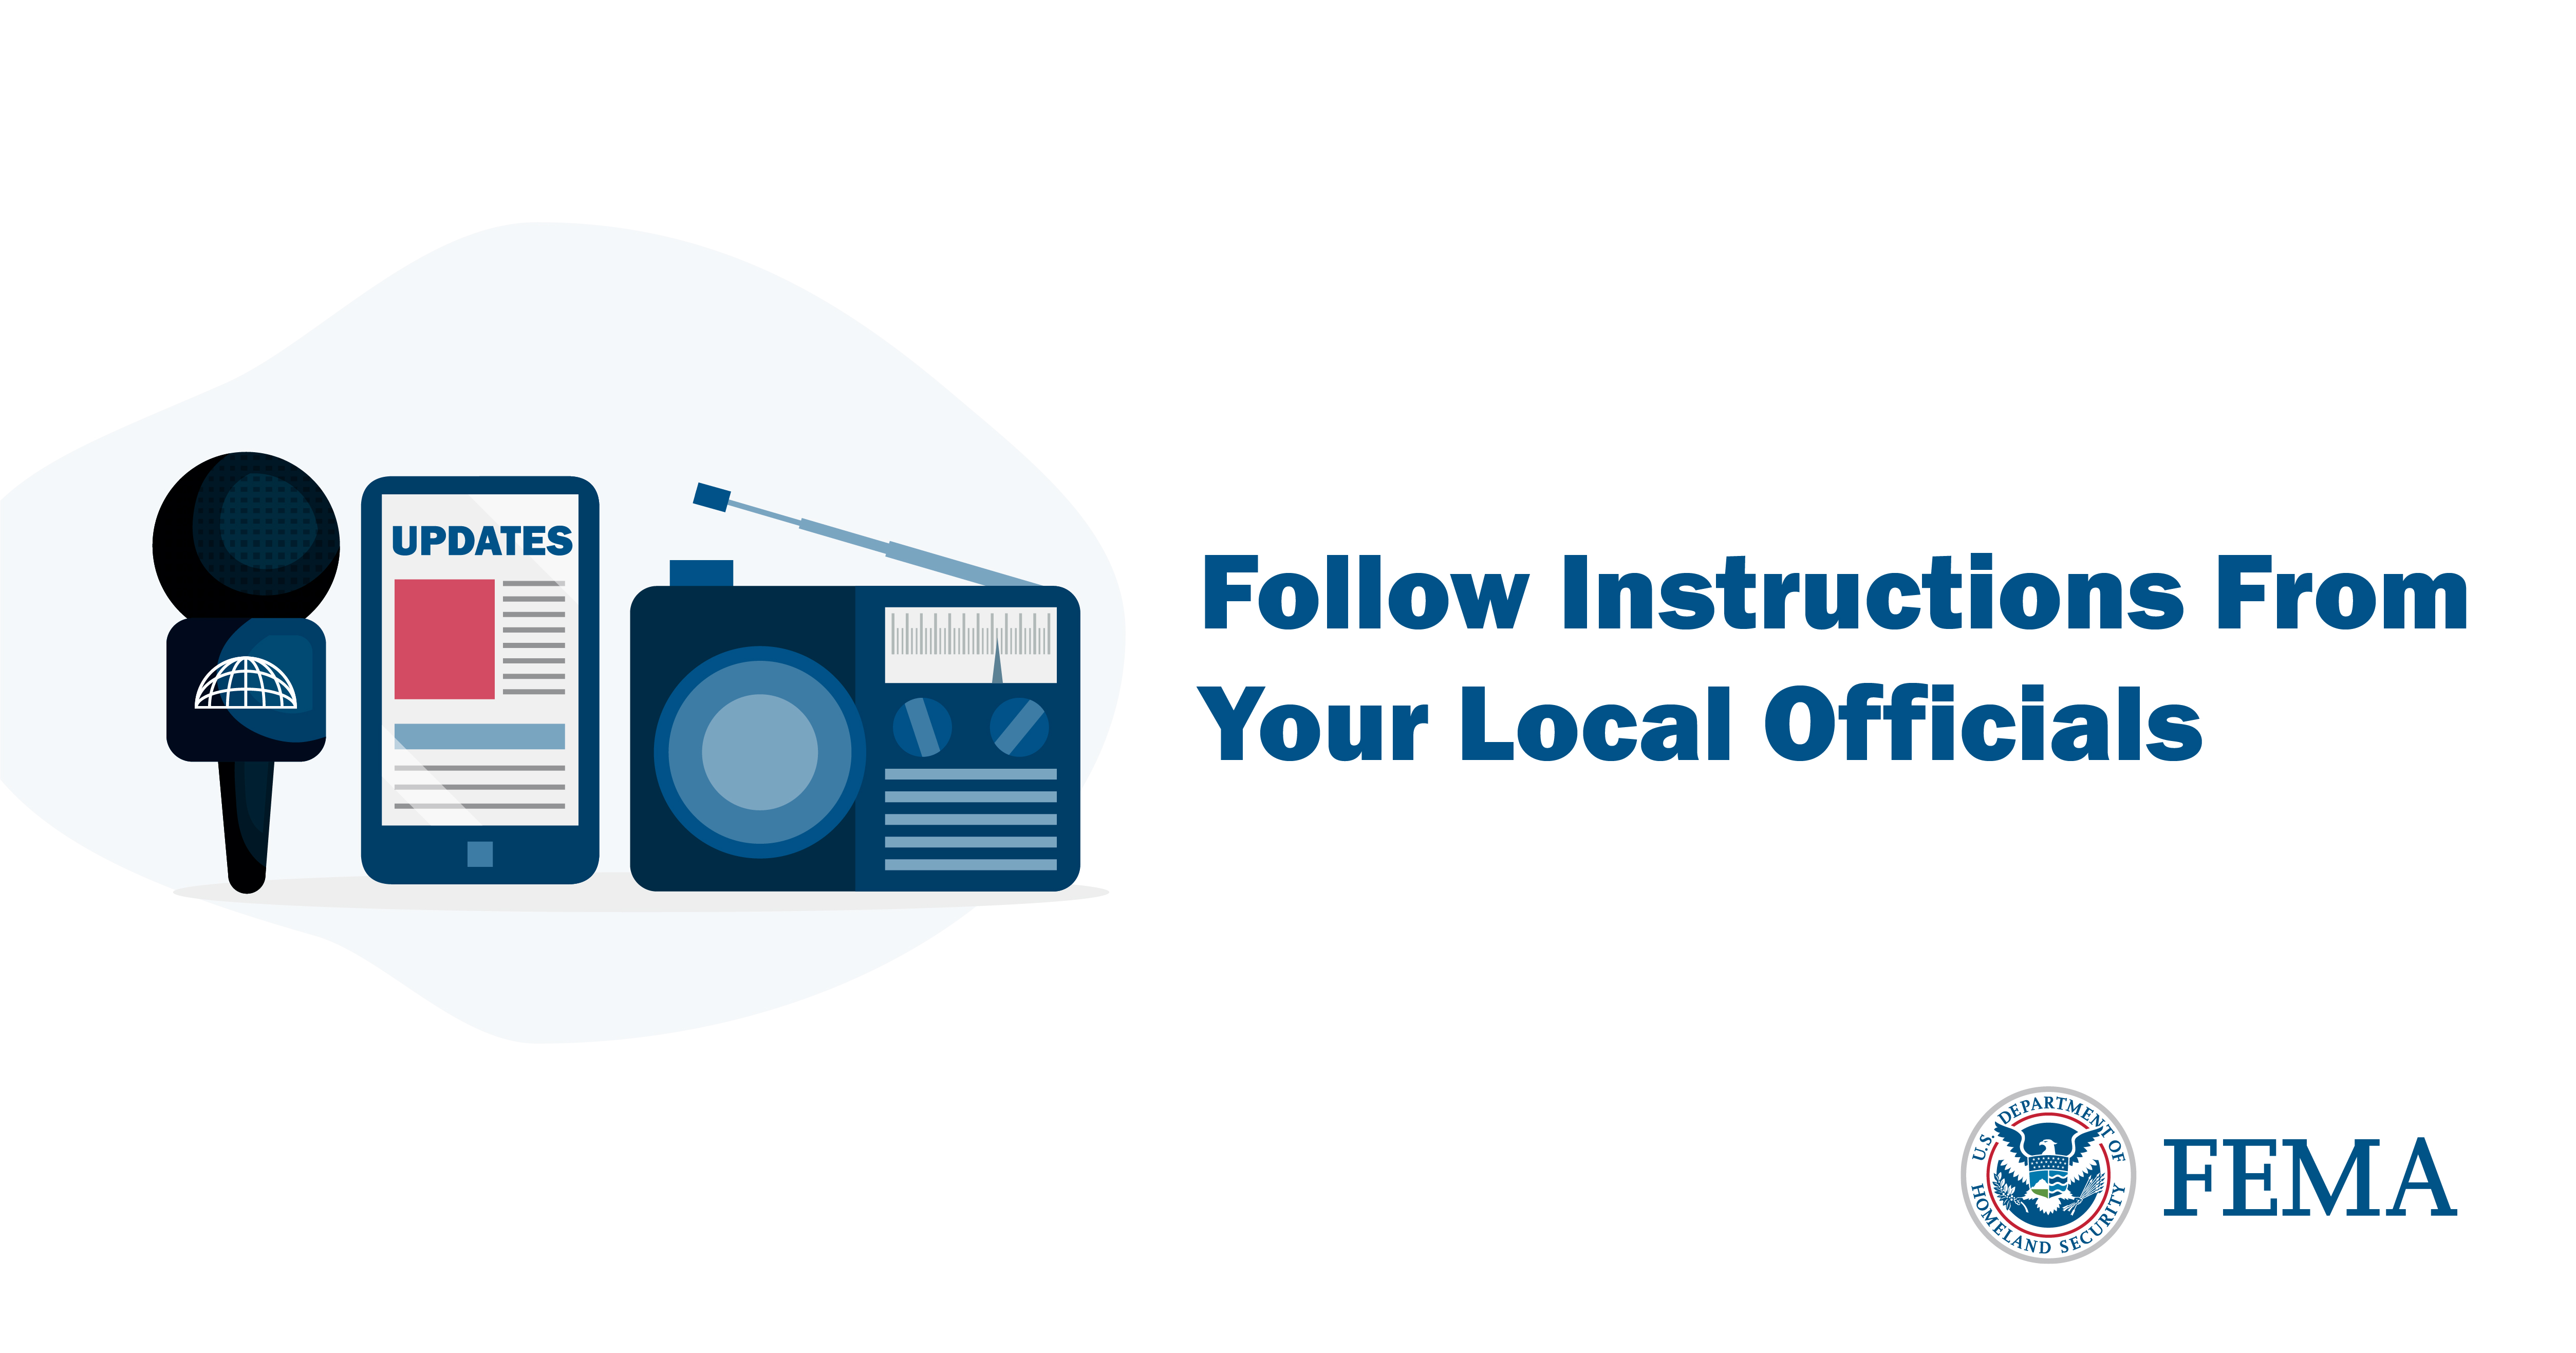 Follow Instructions From Your Local Officials - Federal Emergency Management Agency (FEMA)